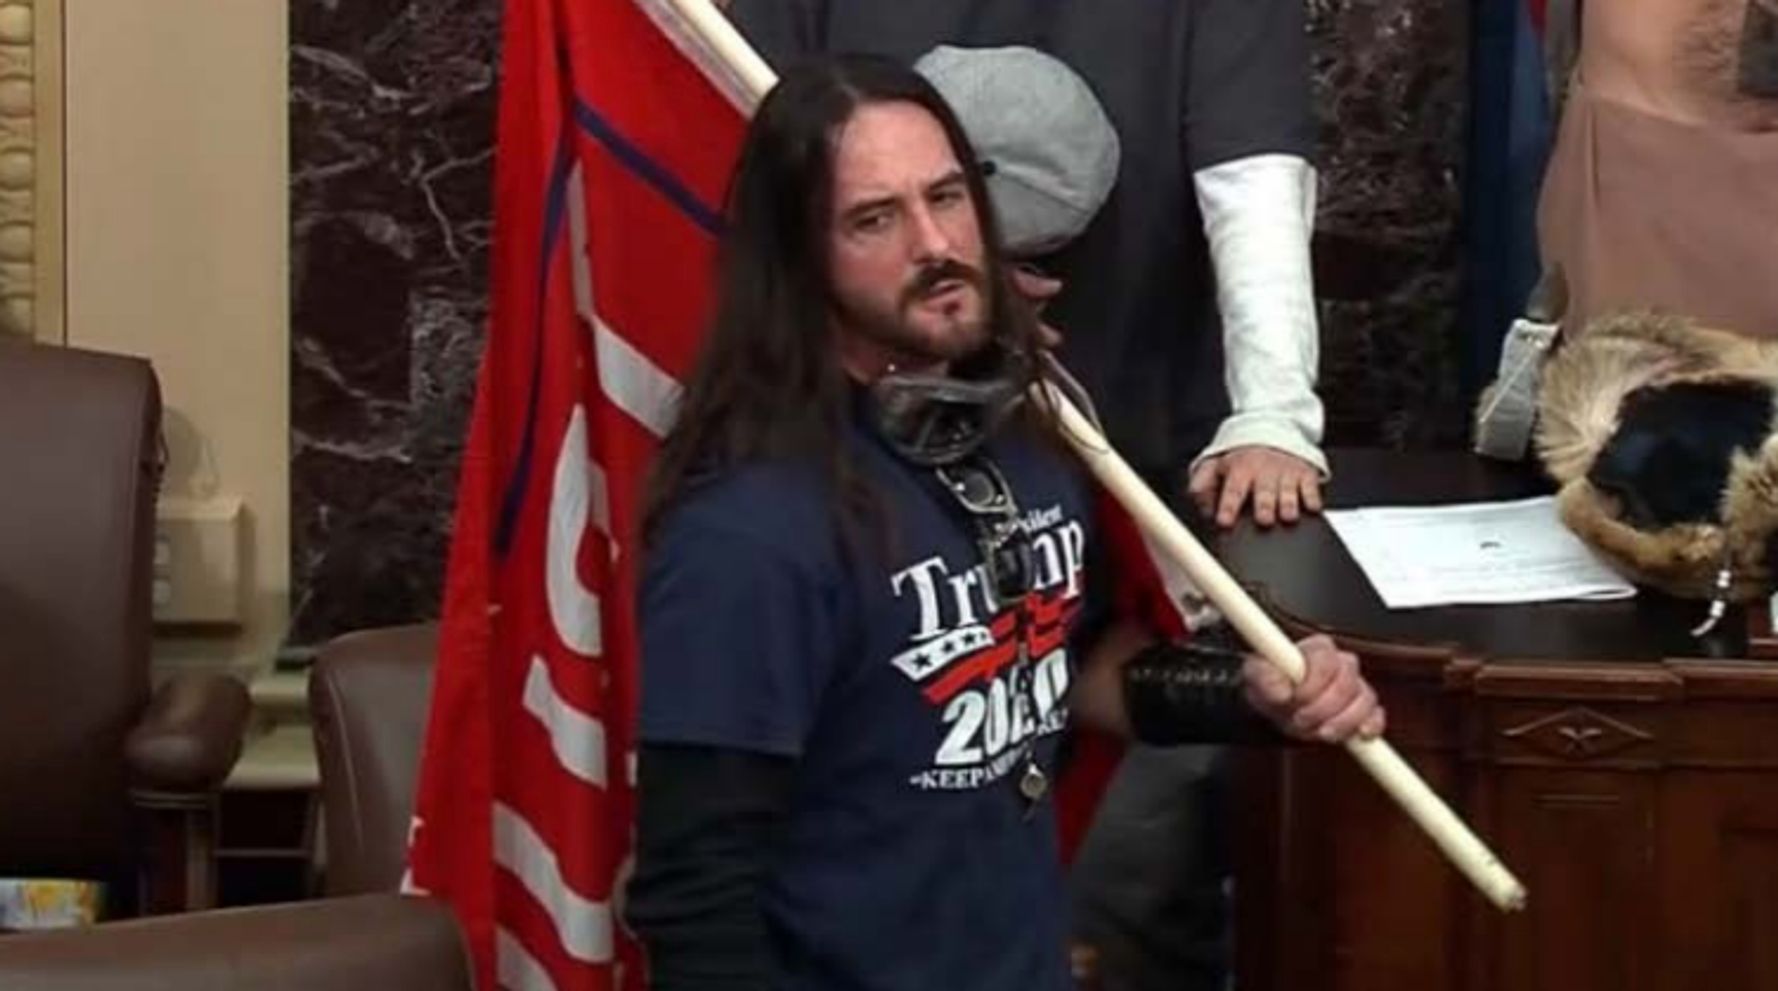 Florida Man Who Stormed Senate Floor With Trump Flag Reaches Plea Deal In Capitol Attack